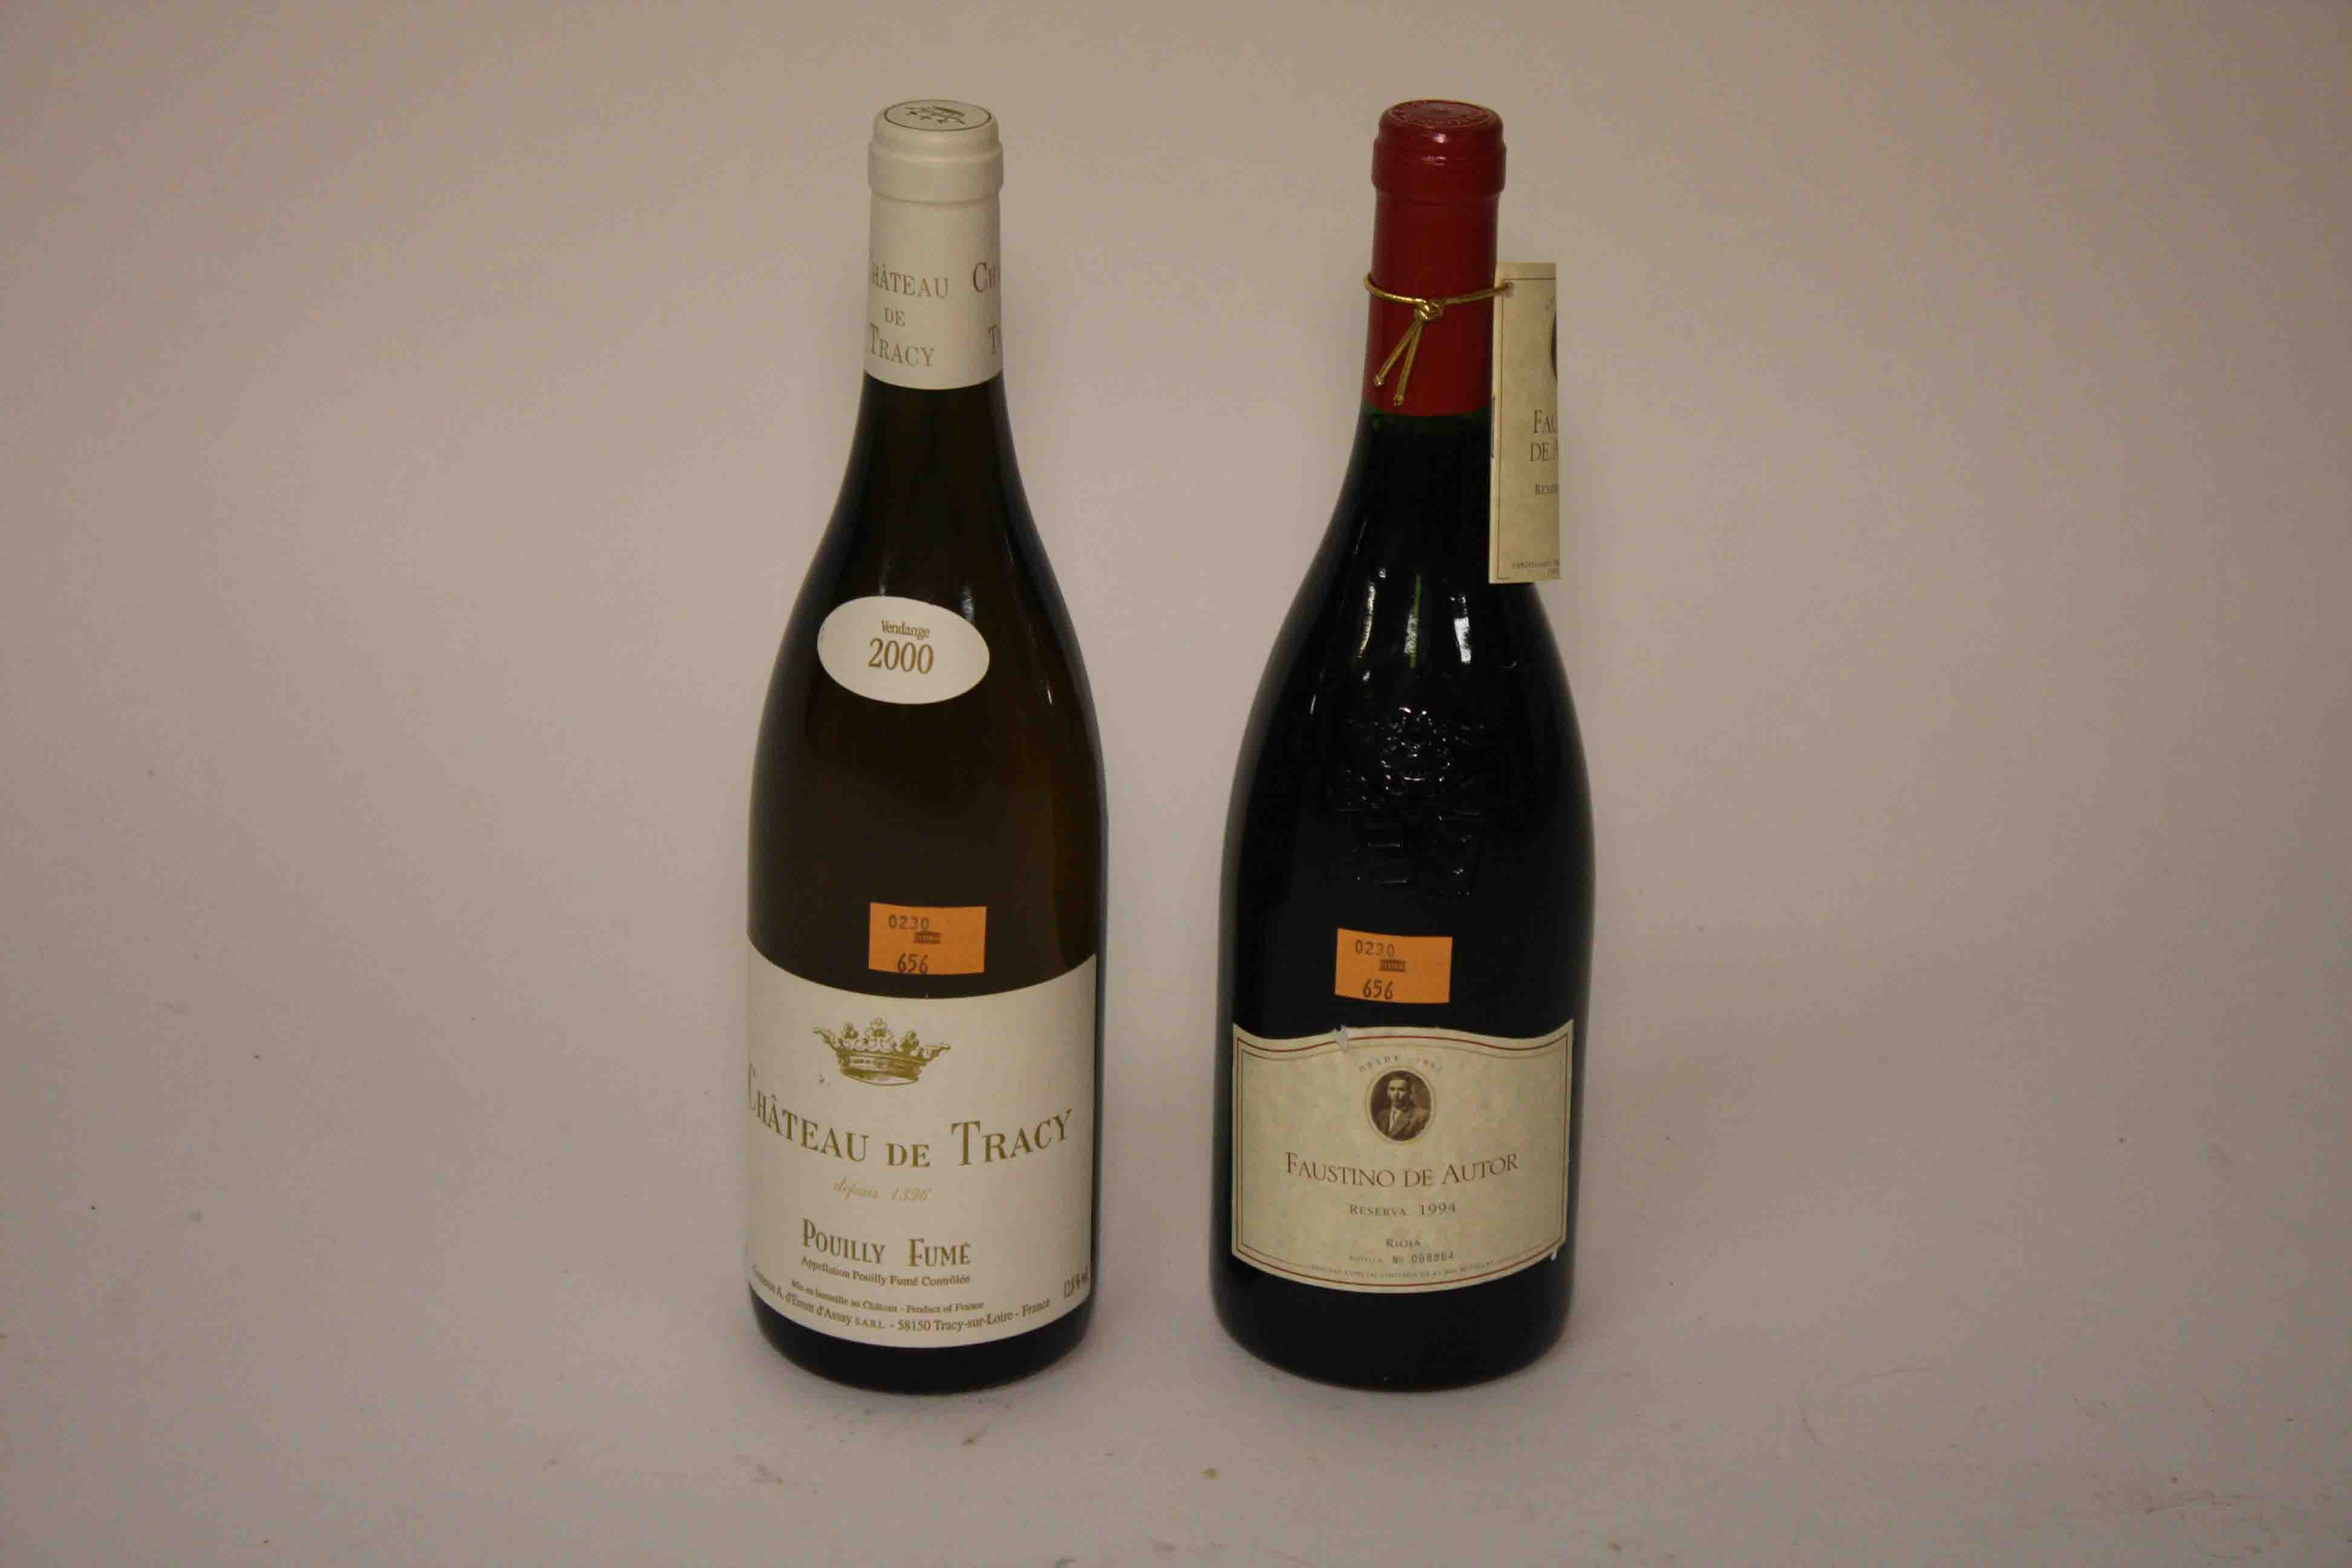 CHATEAU DE TRACY POUILLY FUME ,Vintage 2000, together with one bottle Faustino De Autor, reserva